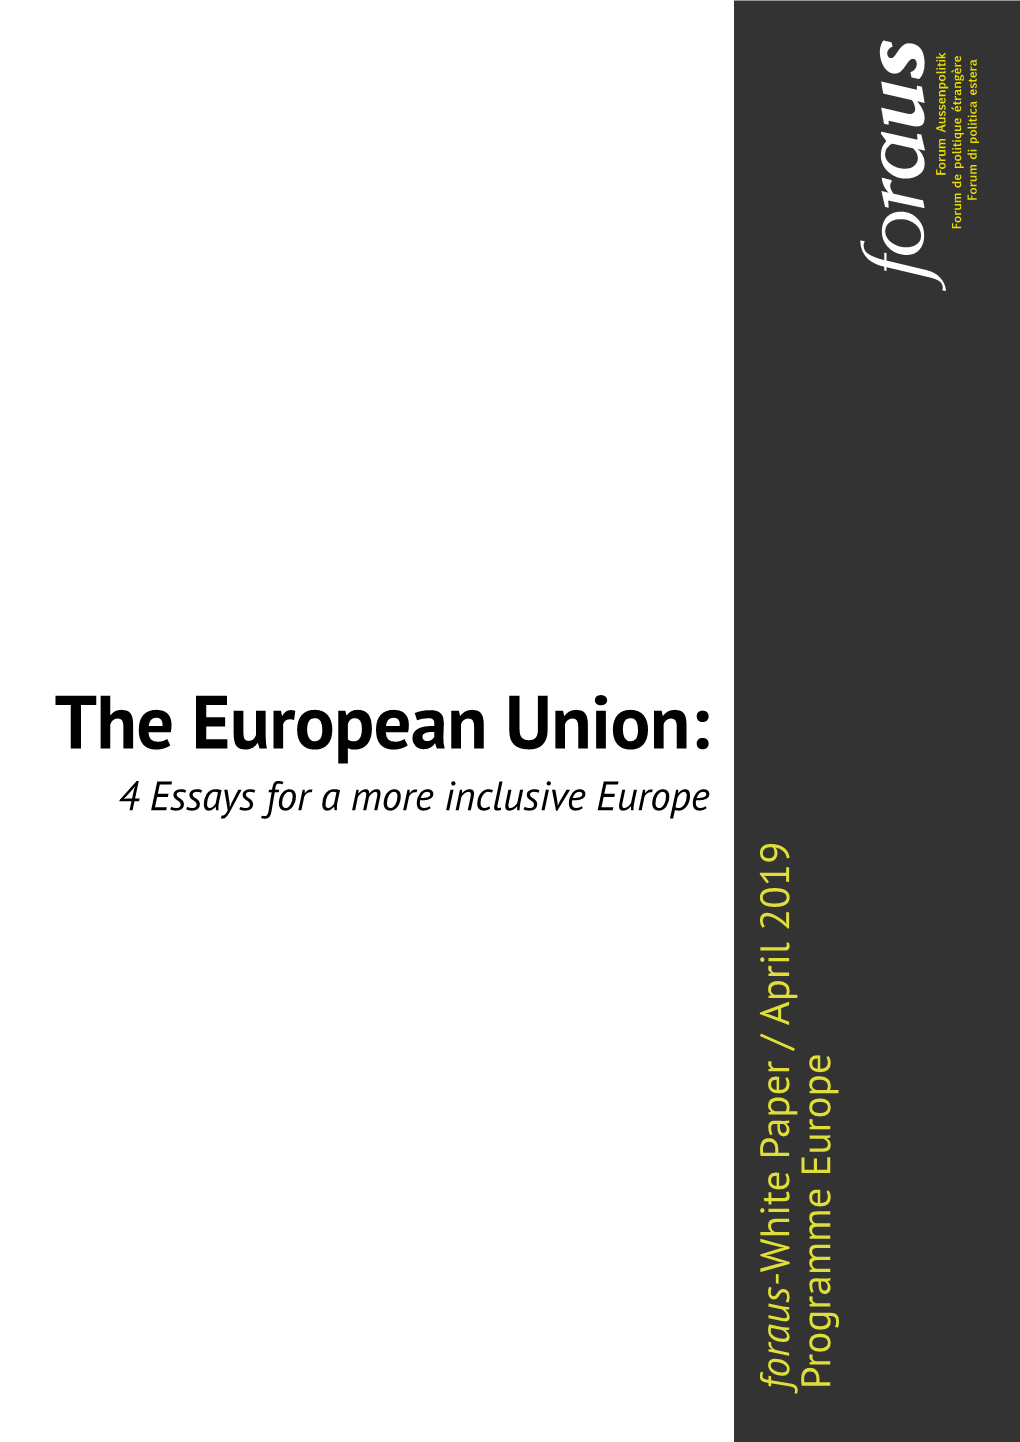 The European Union: 4 Essays for a More Inclusive Europe